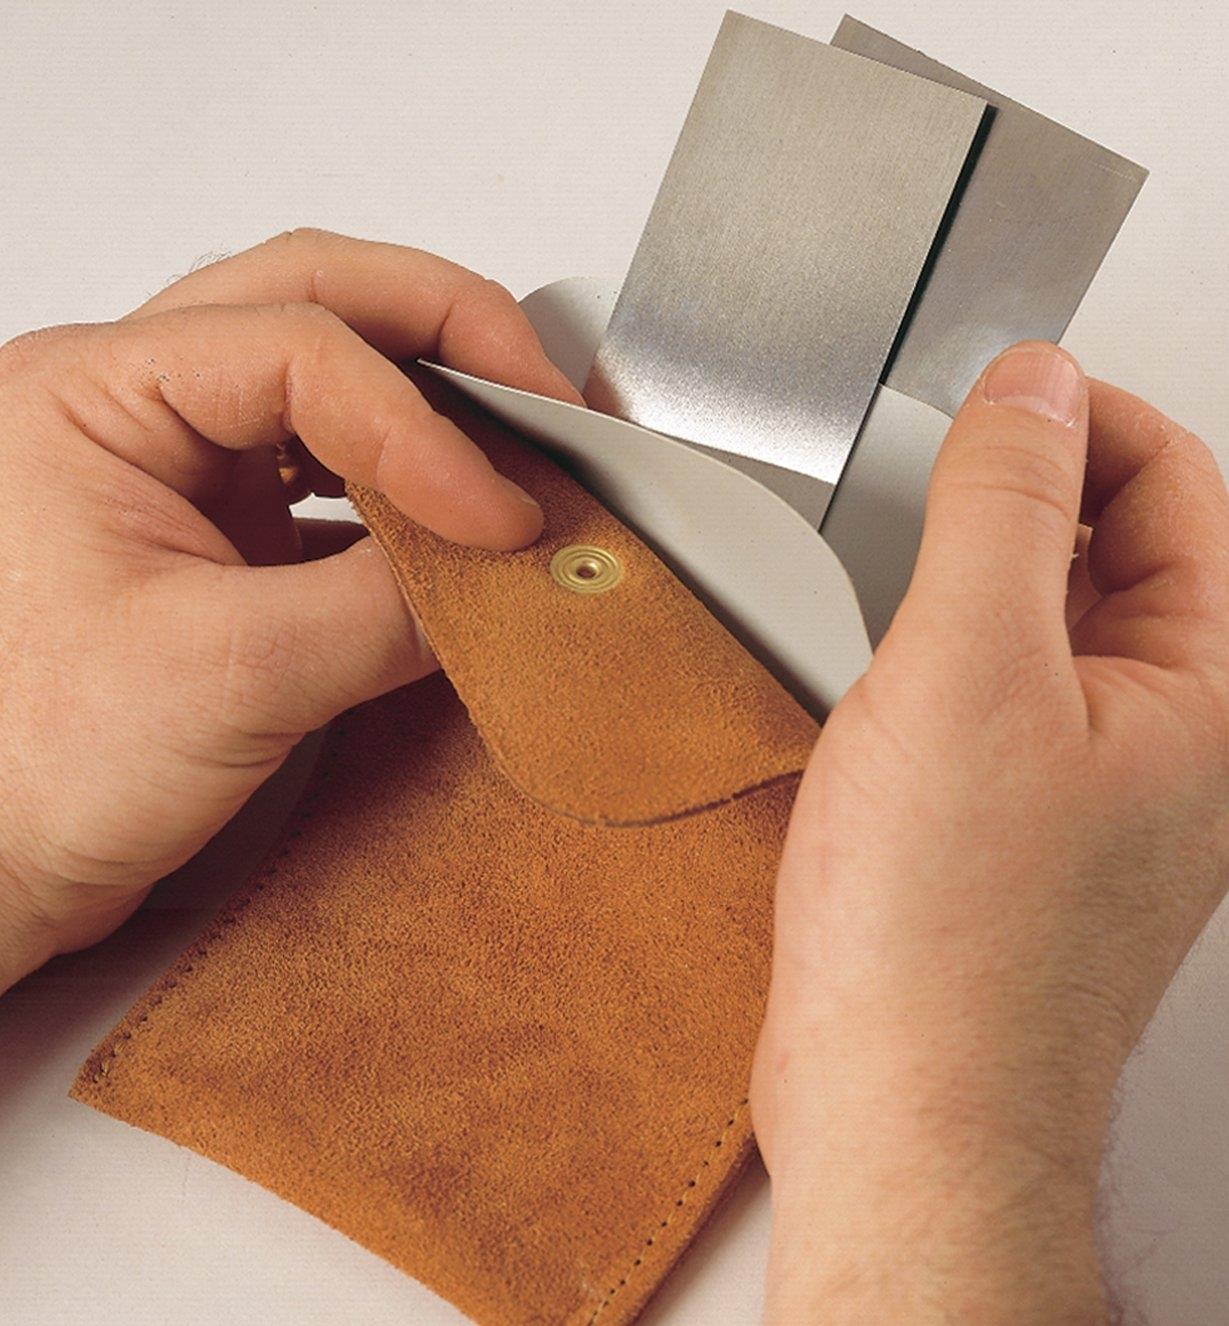 Putting several scrapers into the Leather Scraper Pouch